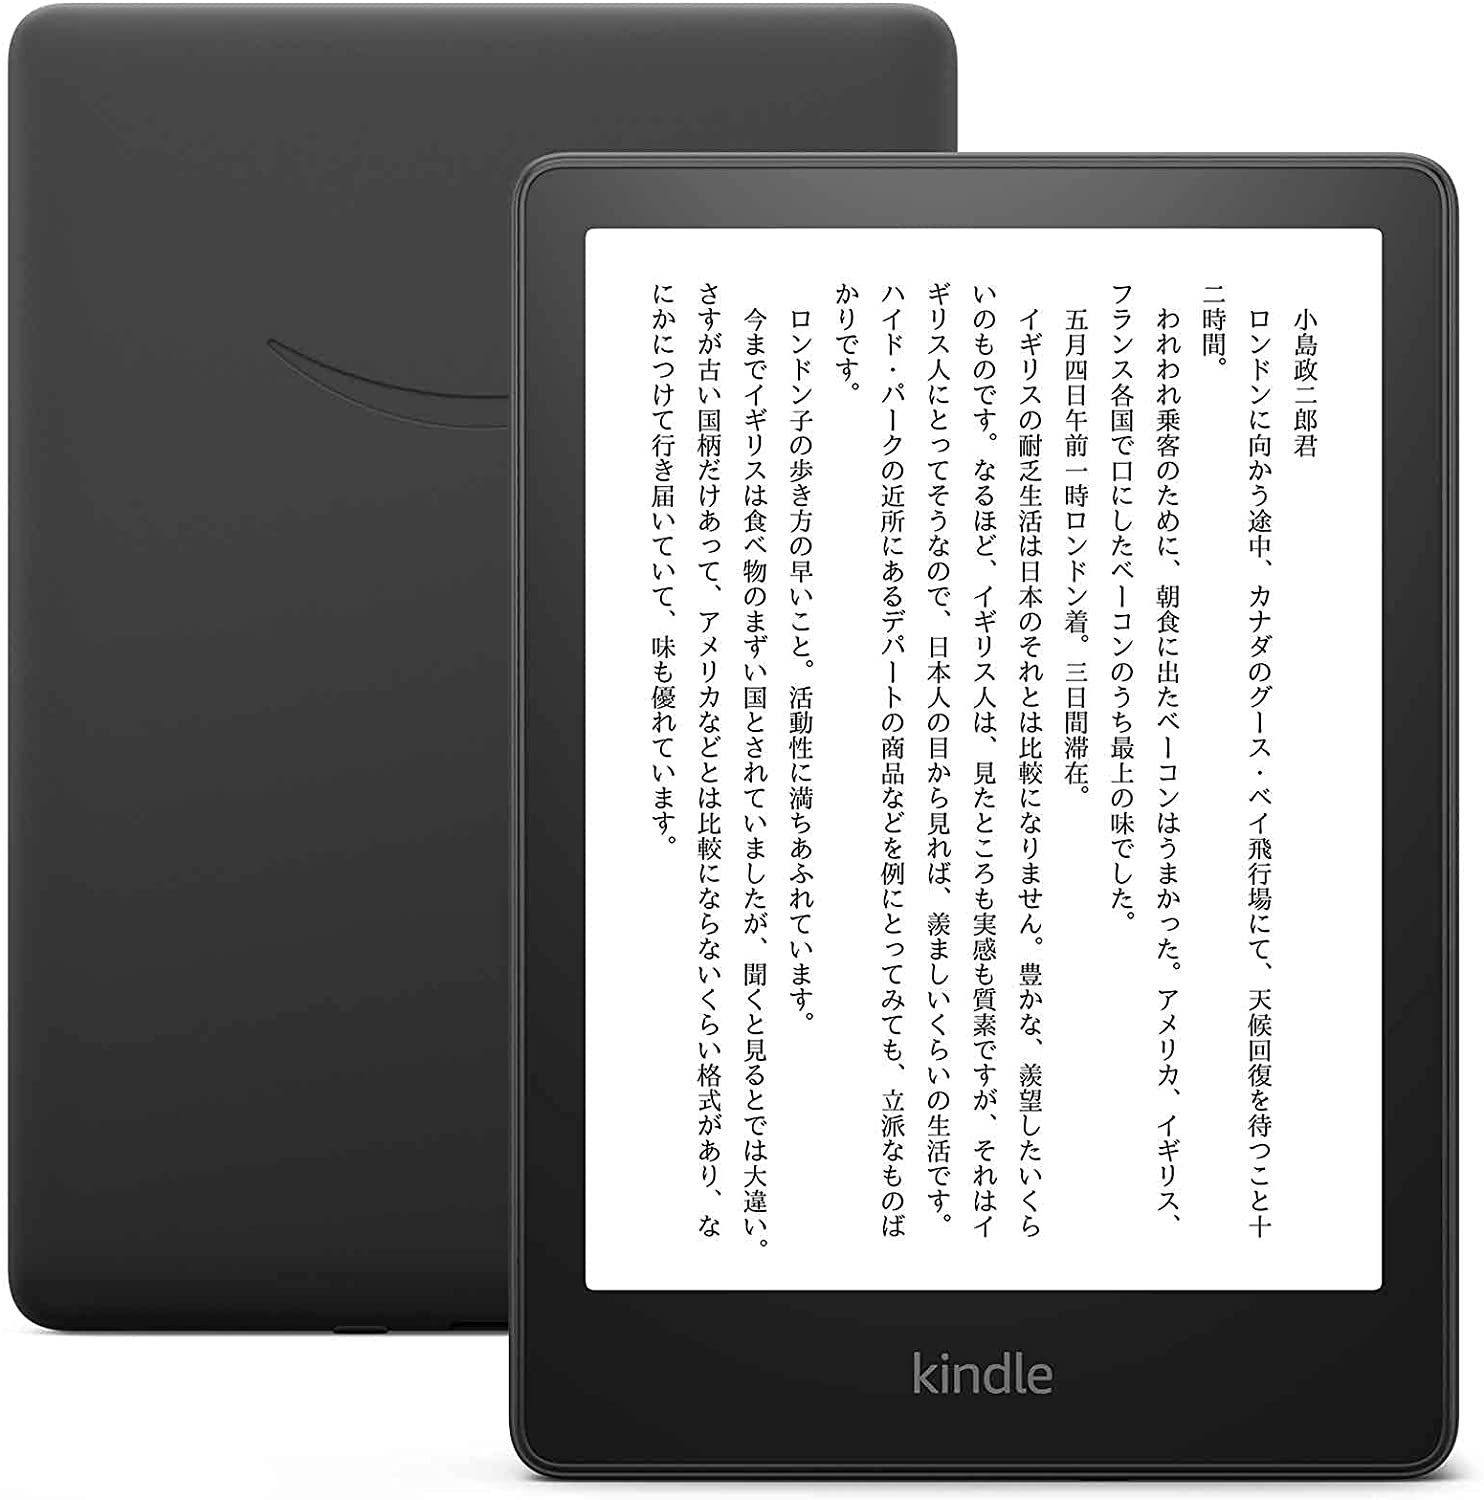 Amazon、Kindle Paperwhite新モデルの予約受付を開始 - GAME Watch